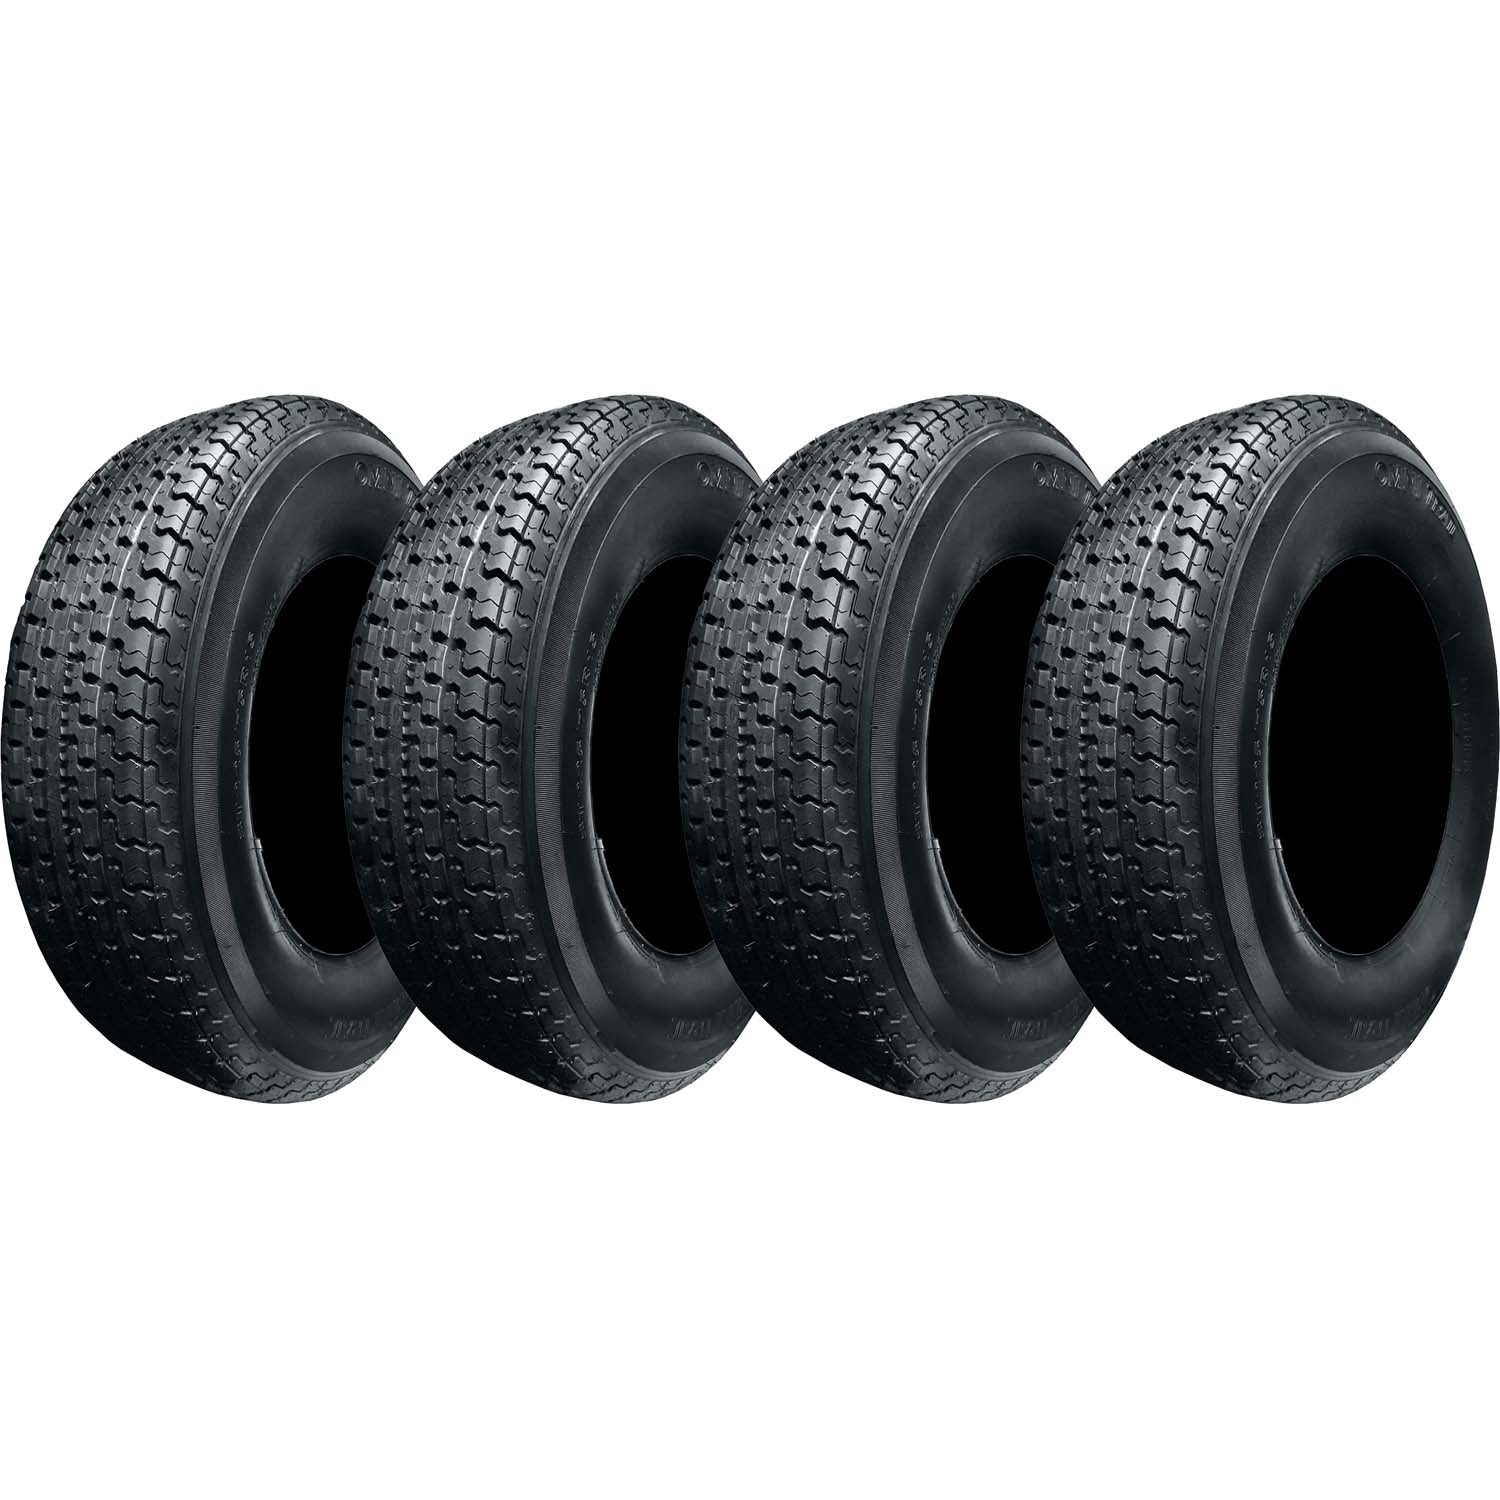 Omni Trail Radial Trailer Tire LRE 10ply ST225/75R15 Pack of 4